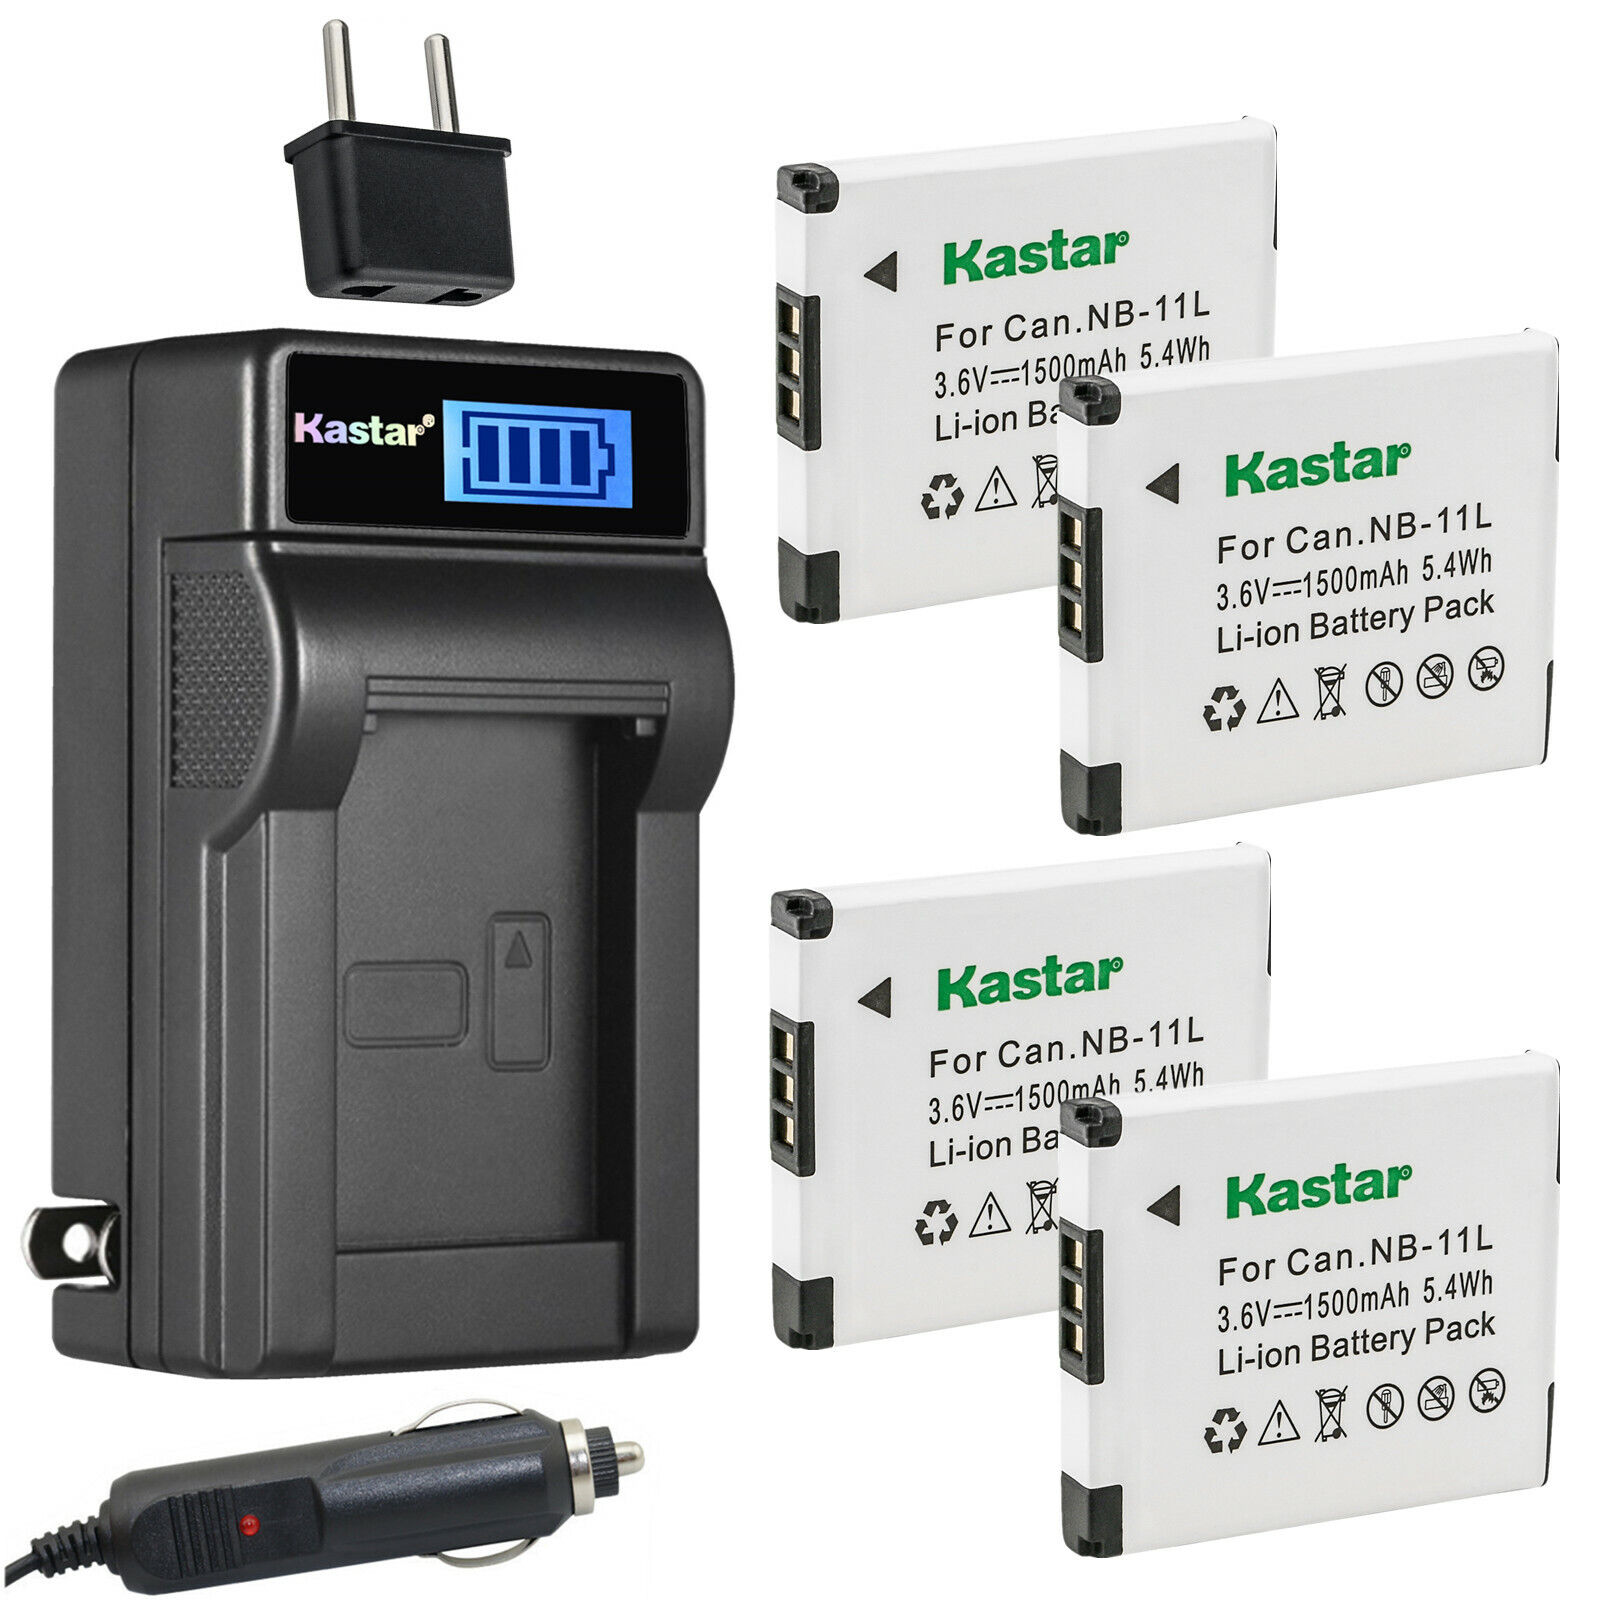 Kastar 4-Pack NB-11L Battery and LCD AC Charger Compatible with Canon IXUS 185, IXUS 190, IXUS 240 HS, IXUS 245 HS, IXUS 265 HS, IXUS 275 HS, IXUS 285 HS, IXUS 320 HS, IXY 110F, IXY 220F Cameras - image 1 of 6